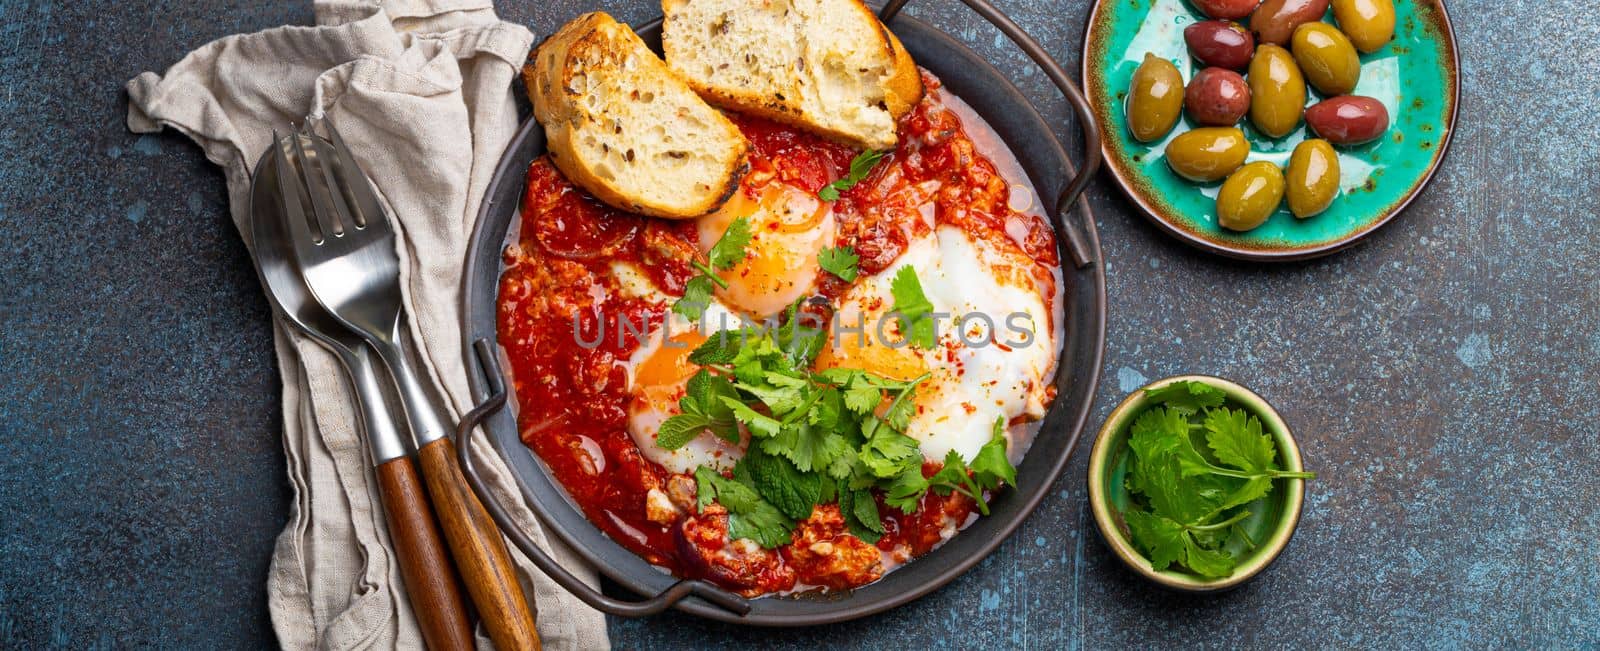 Middle Eastern and Maghrebi healthy dish Shakshouka made of eggs and tomato sauce served in pan by its_al_dente